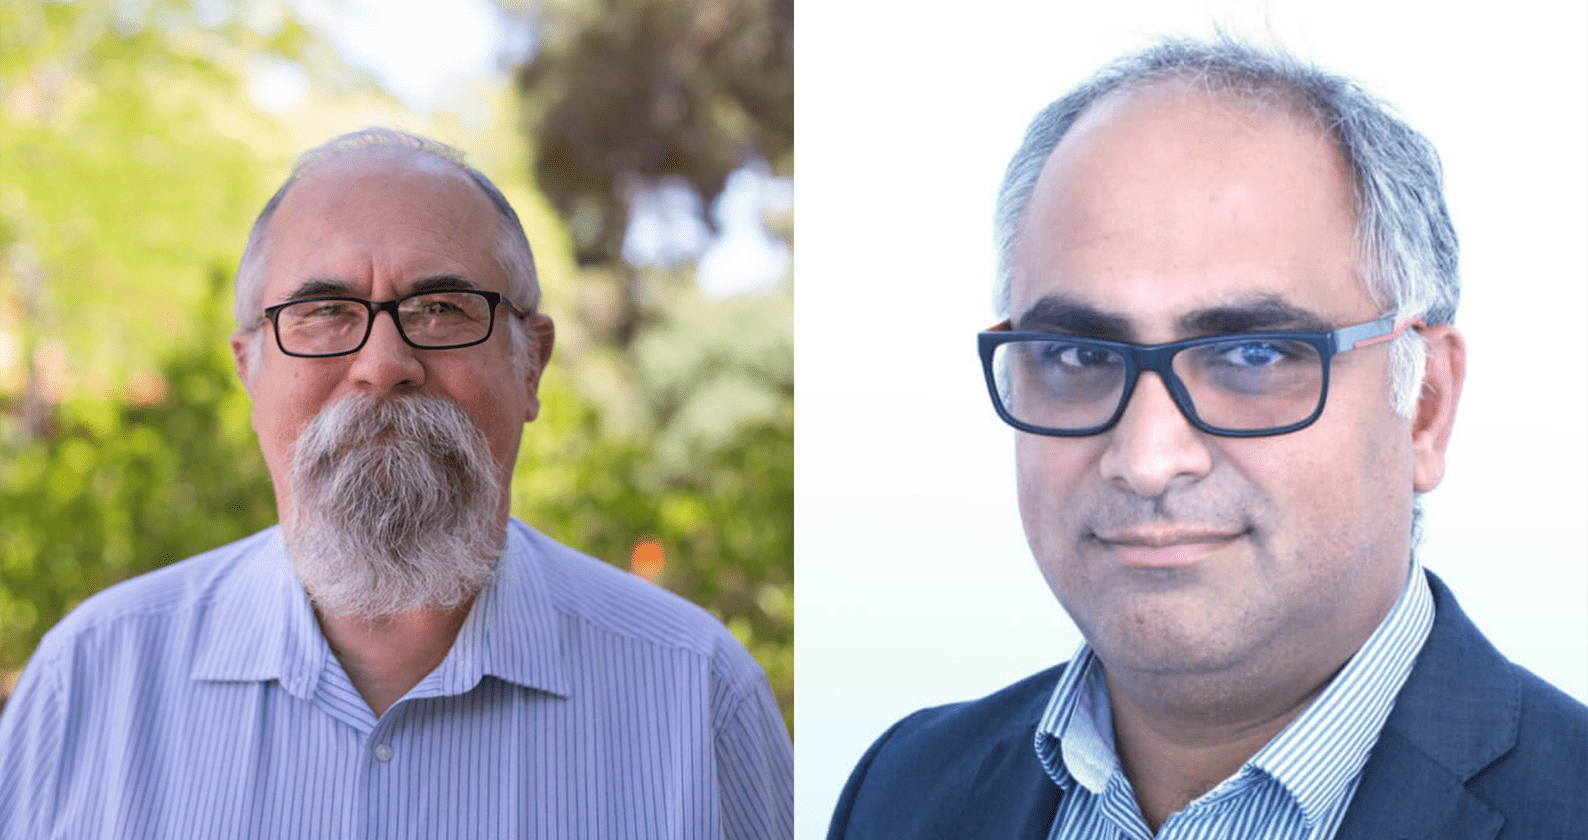 Image for Curtin and Cisco appoint two eminent Professors to lead technology centre